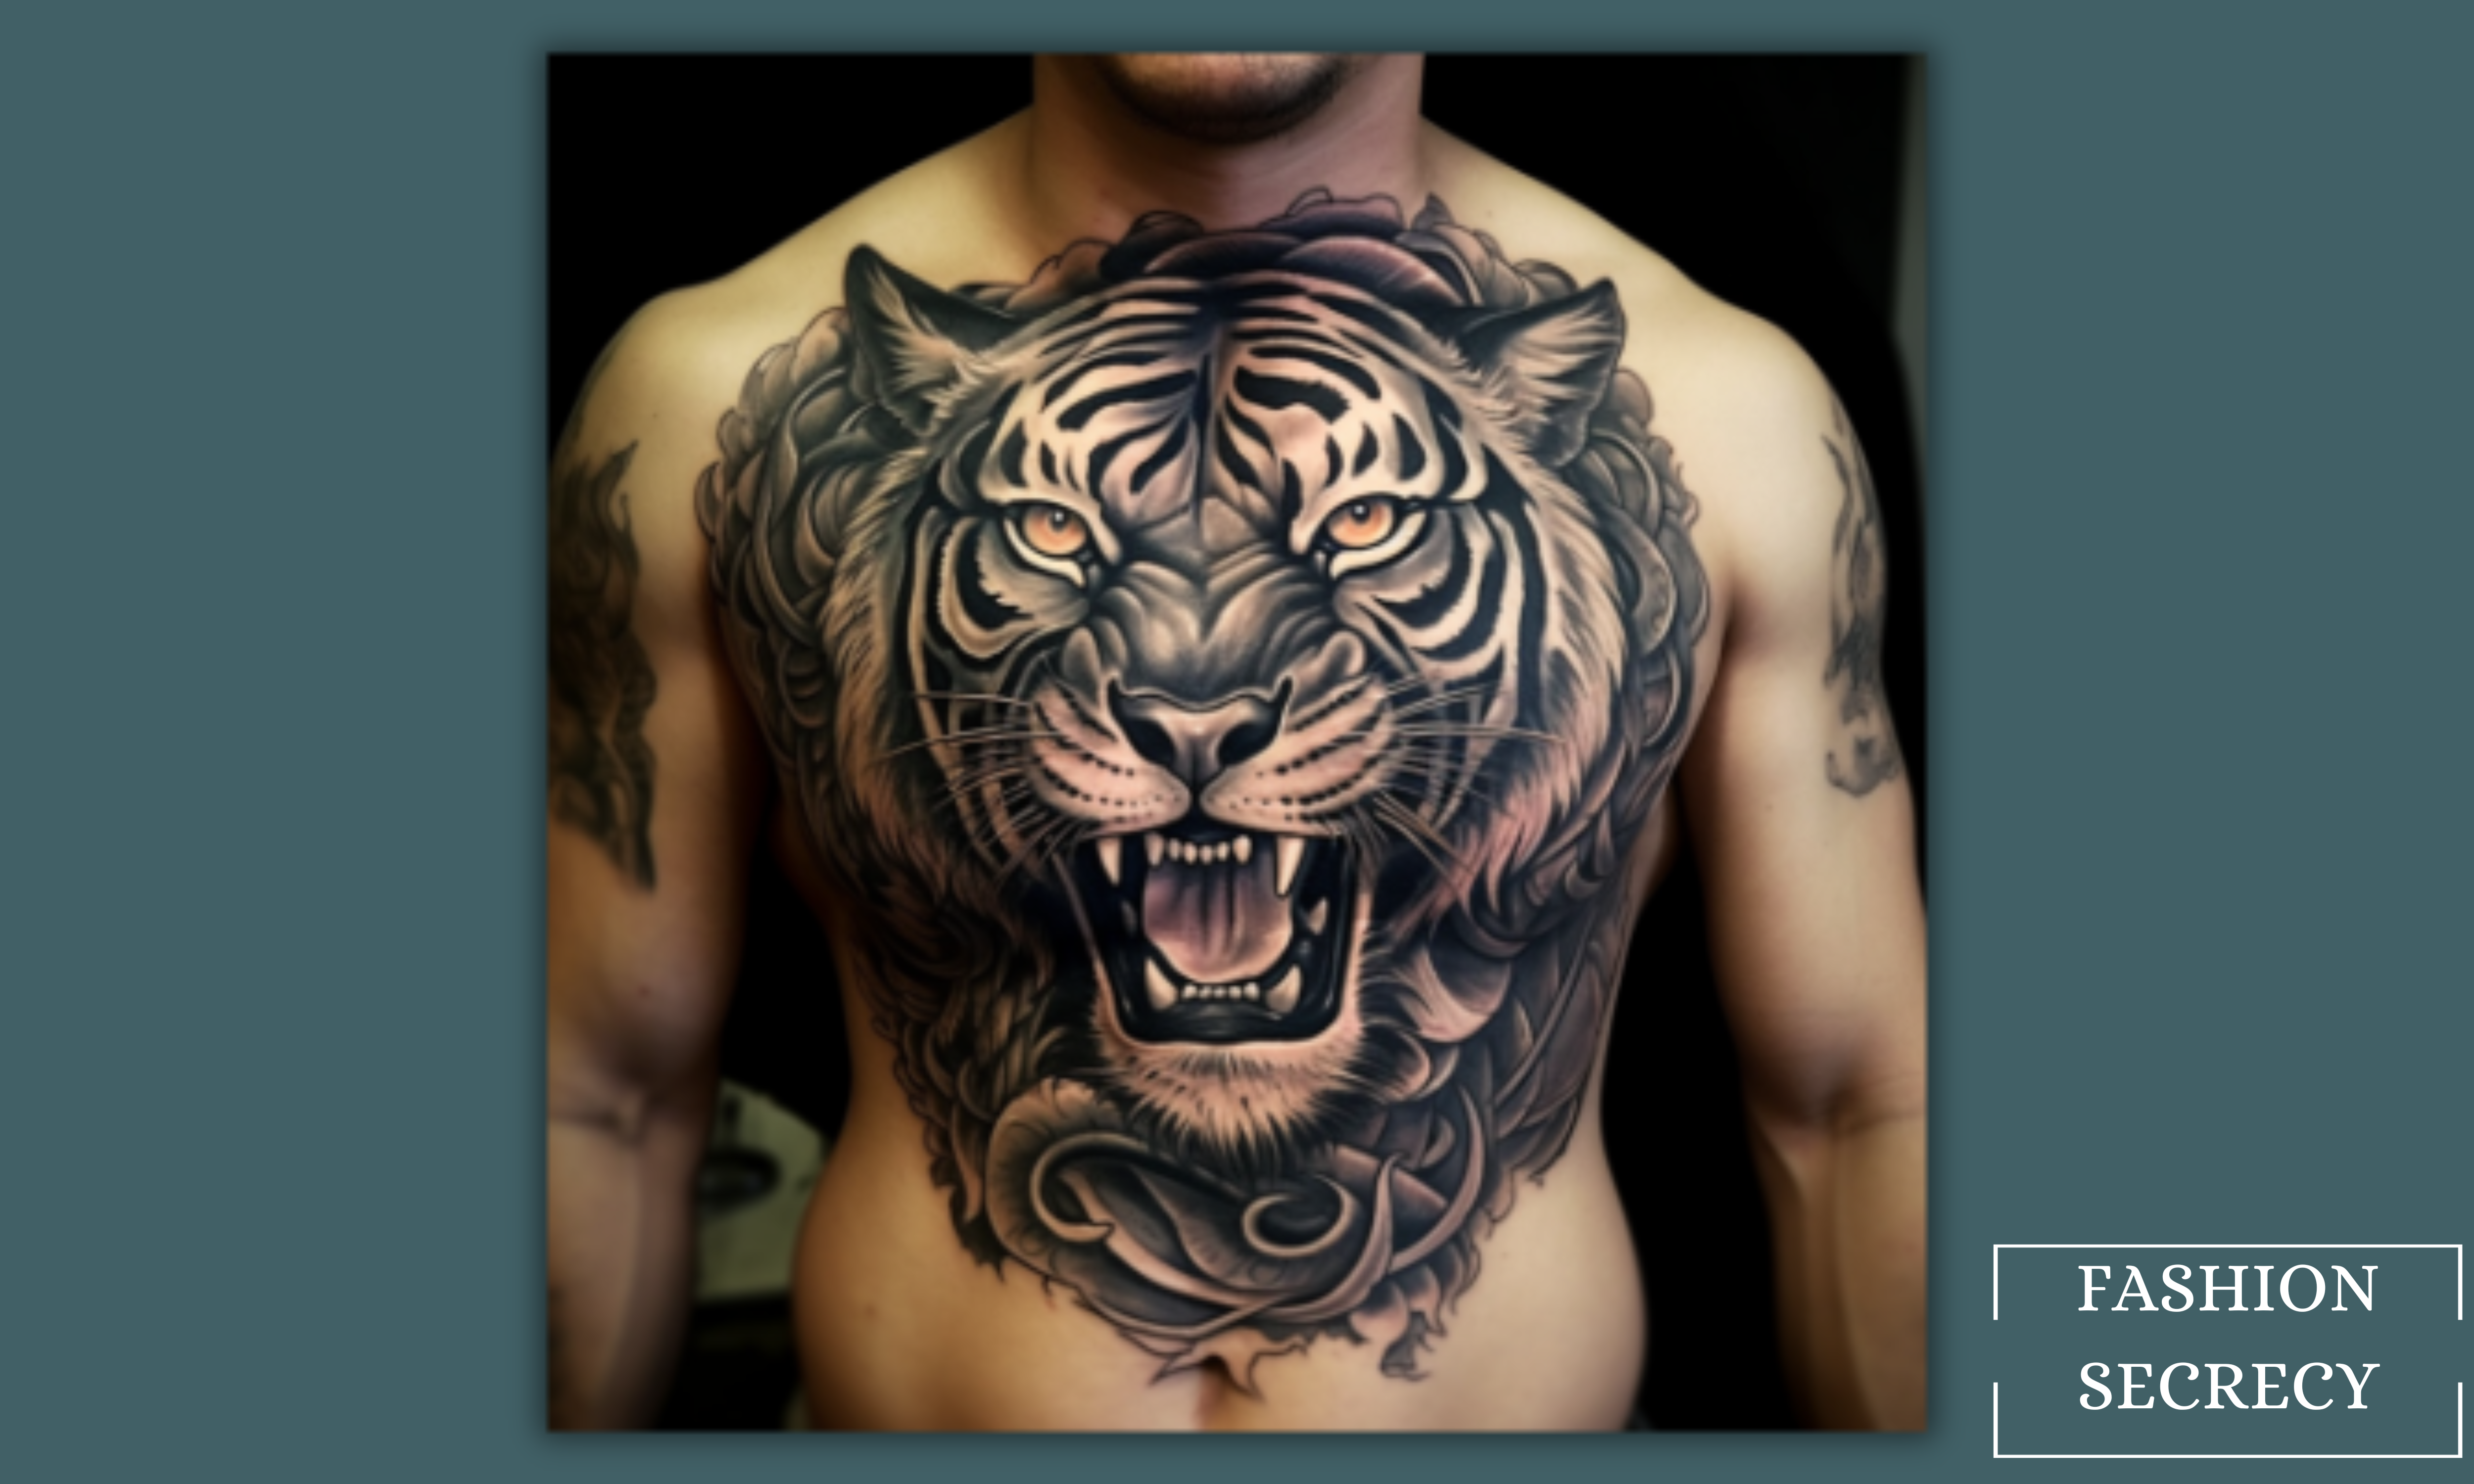 Tattoos in Society: Meaning, Styles & More - Iron & Ink Tattoo